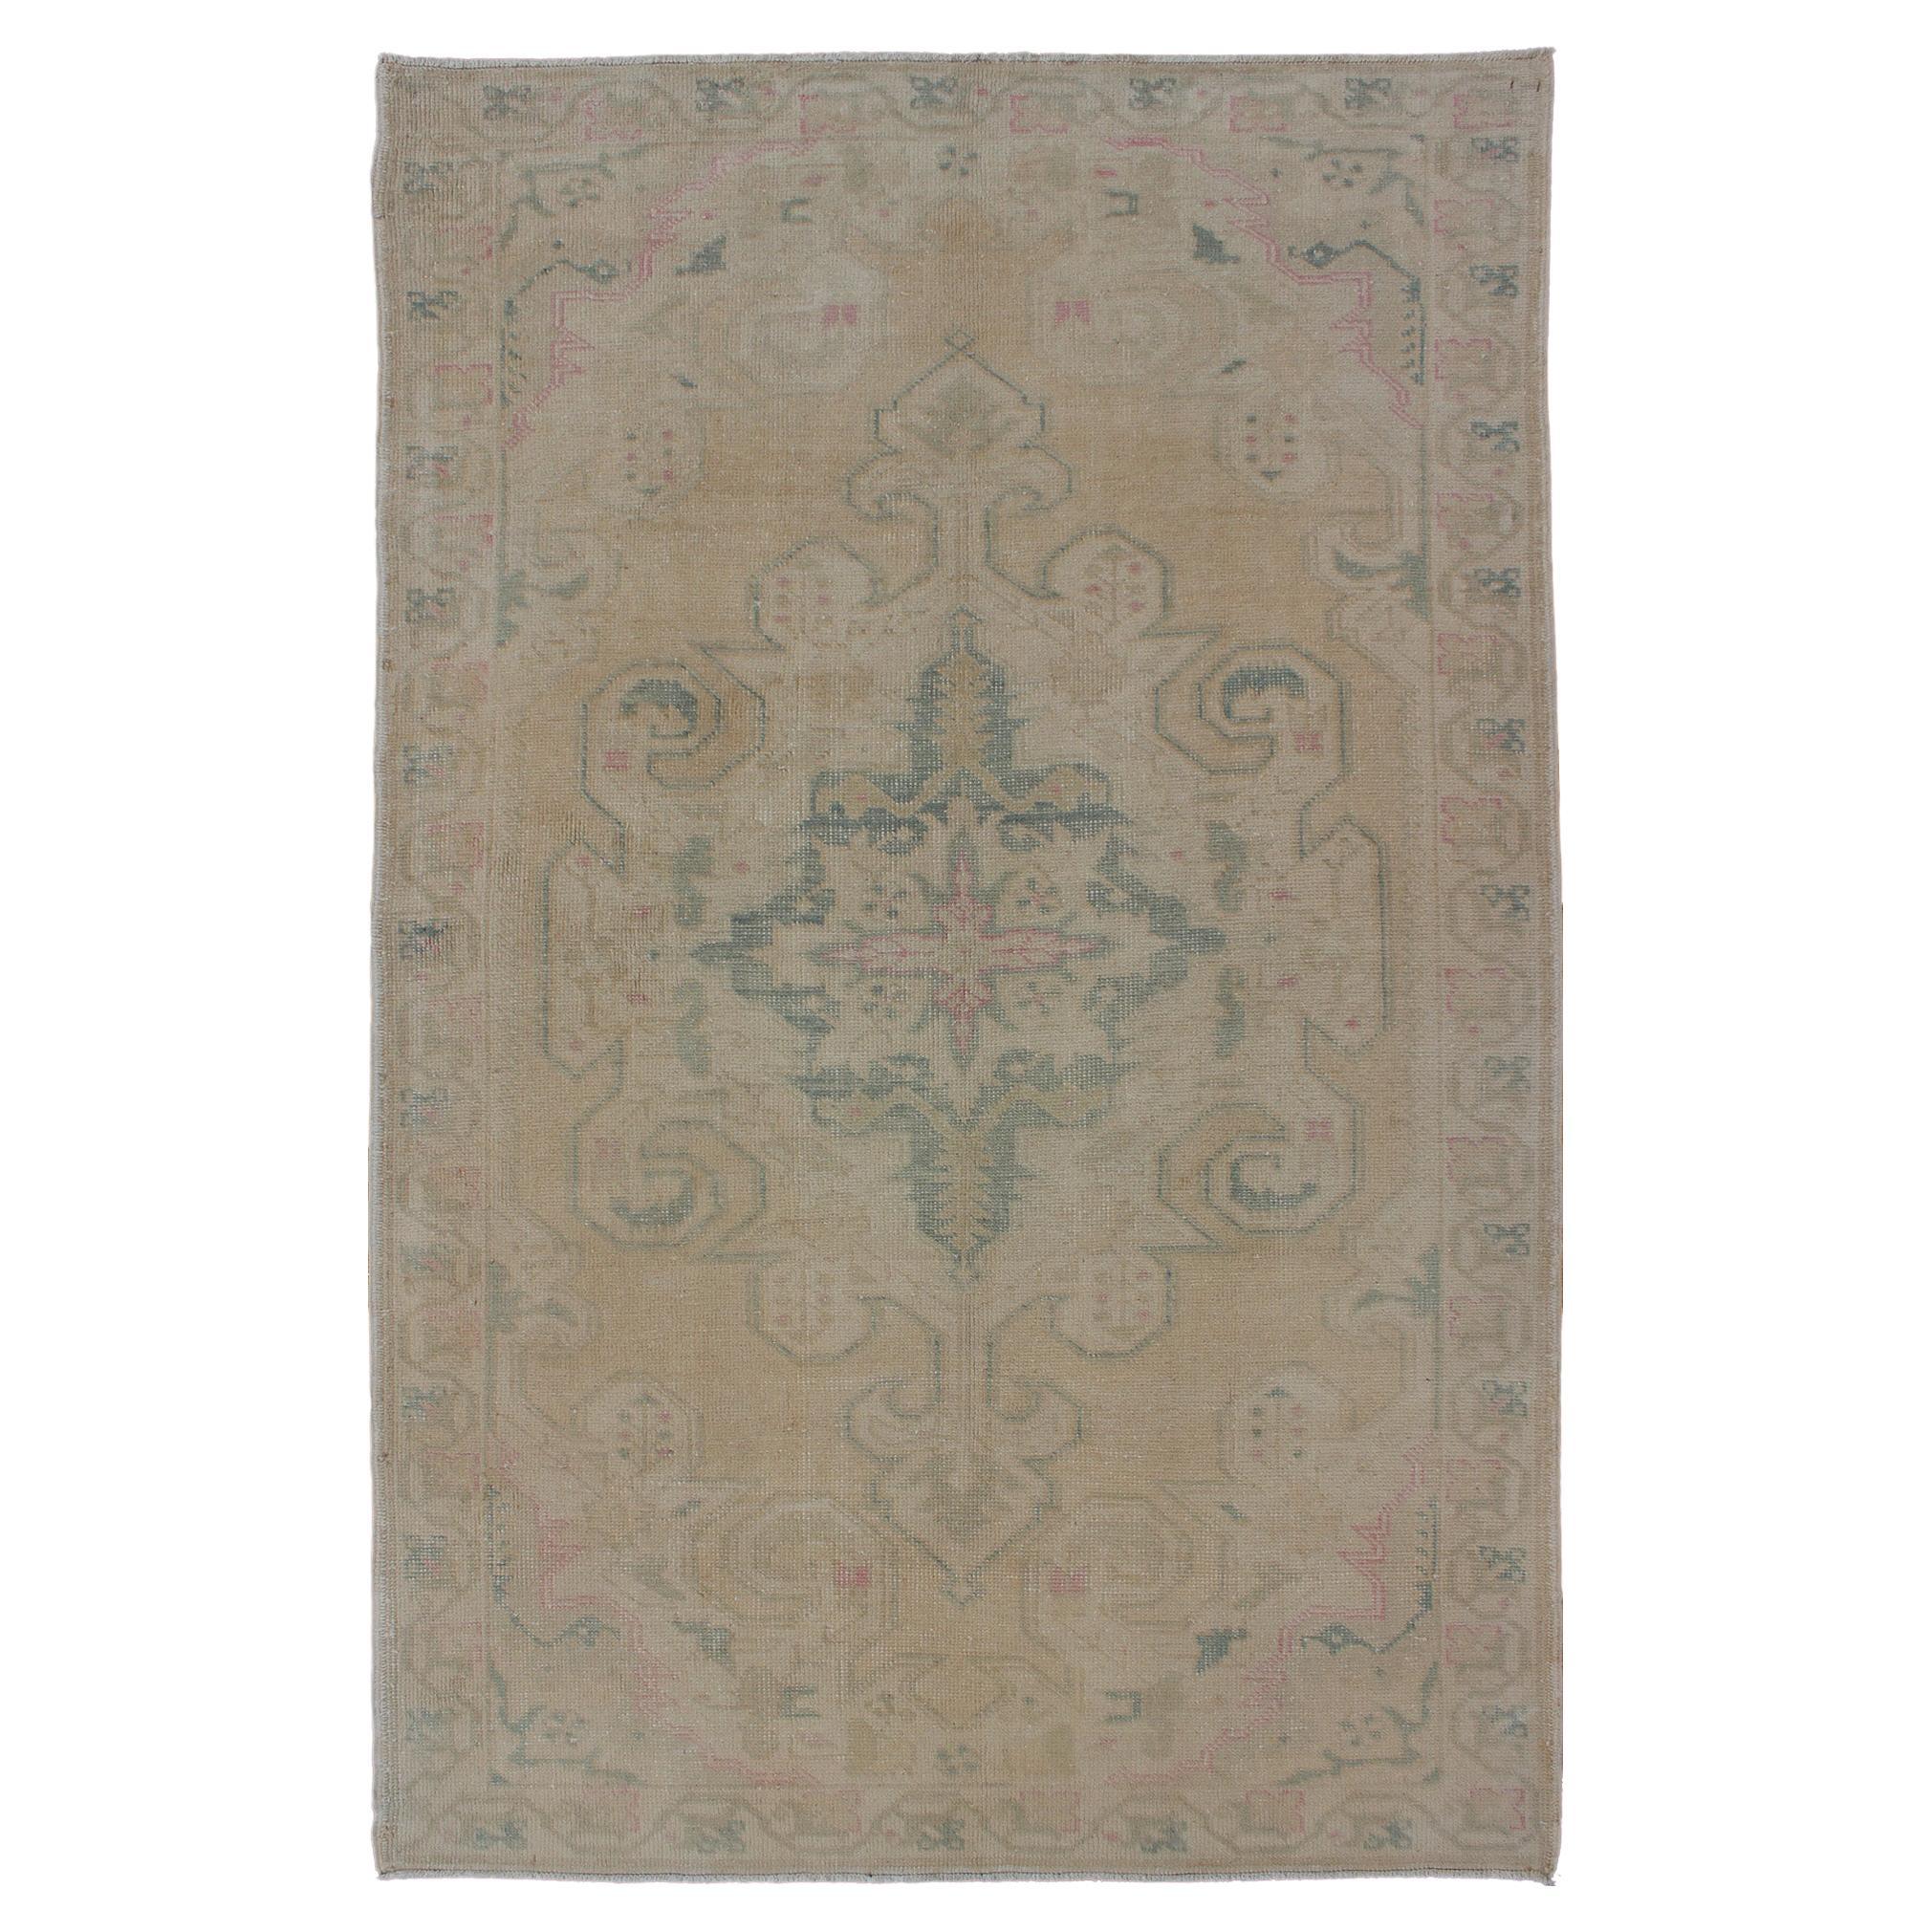 Vintage Oushak Rug from Turkey with Muted Colors and Floral Medallion